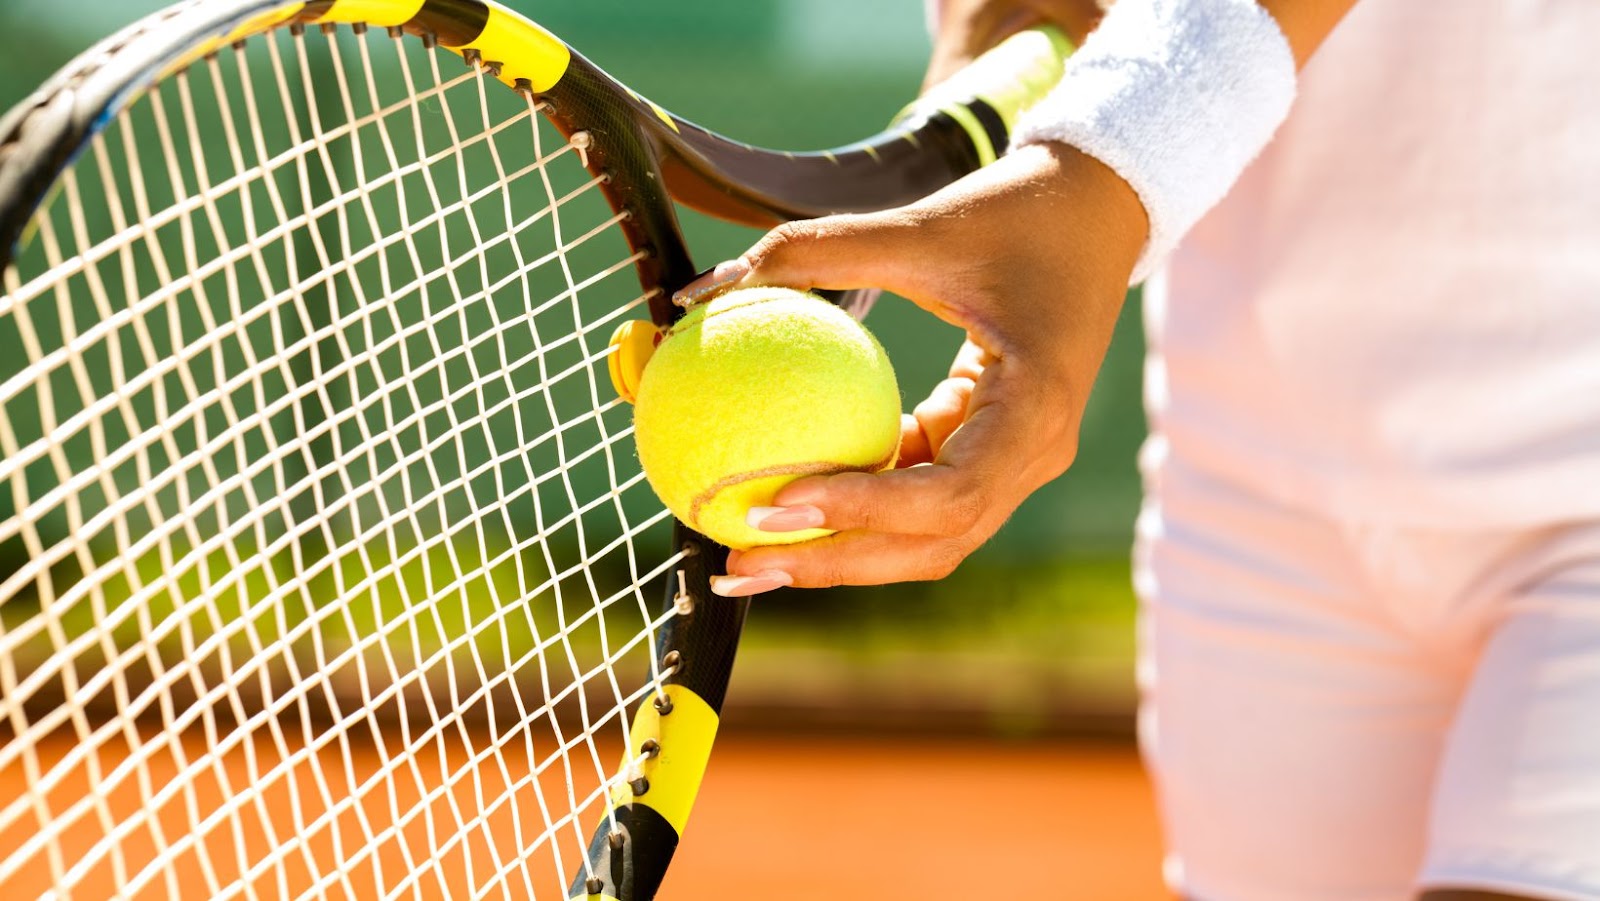 How To Increase Your Tennis Court Performance With The Most Powerful Tennis Grip?